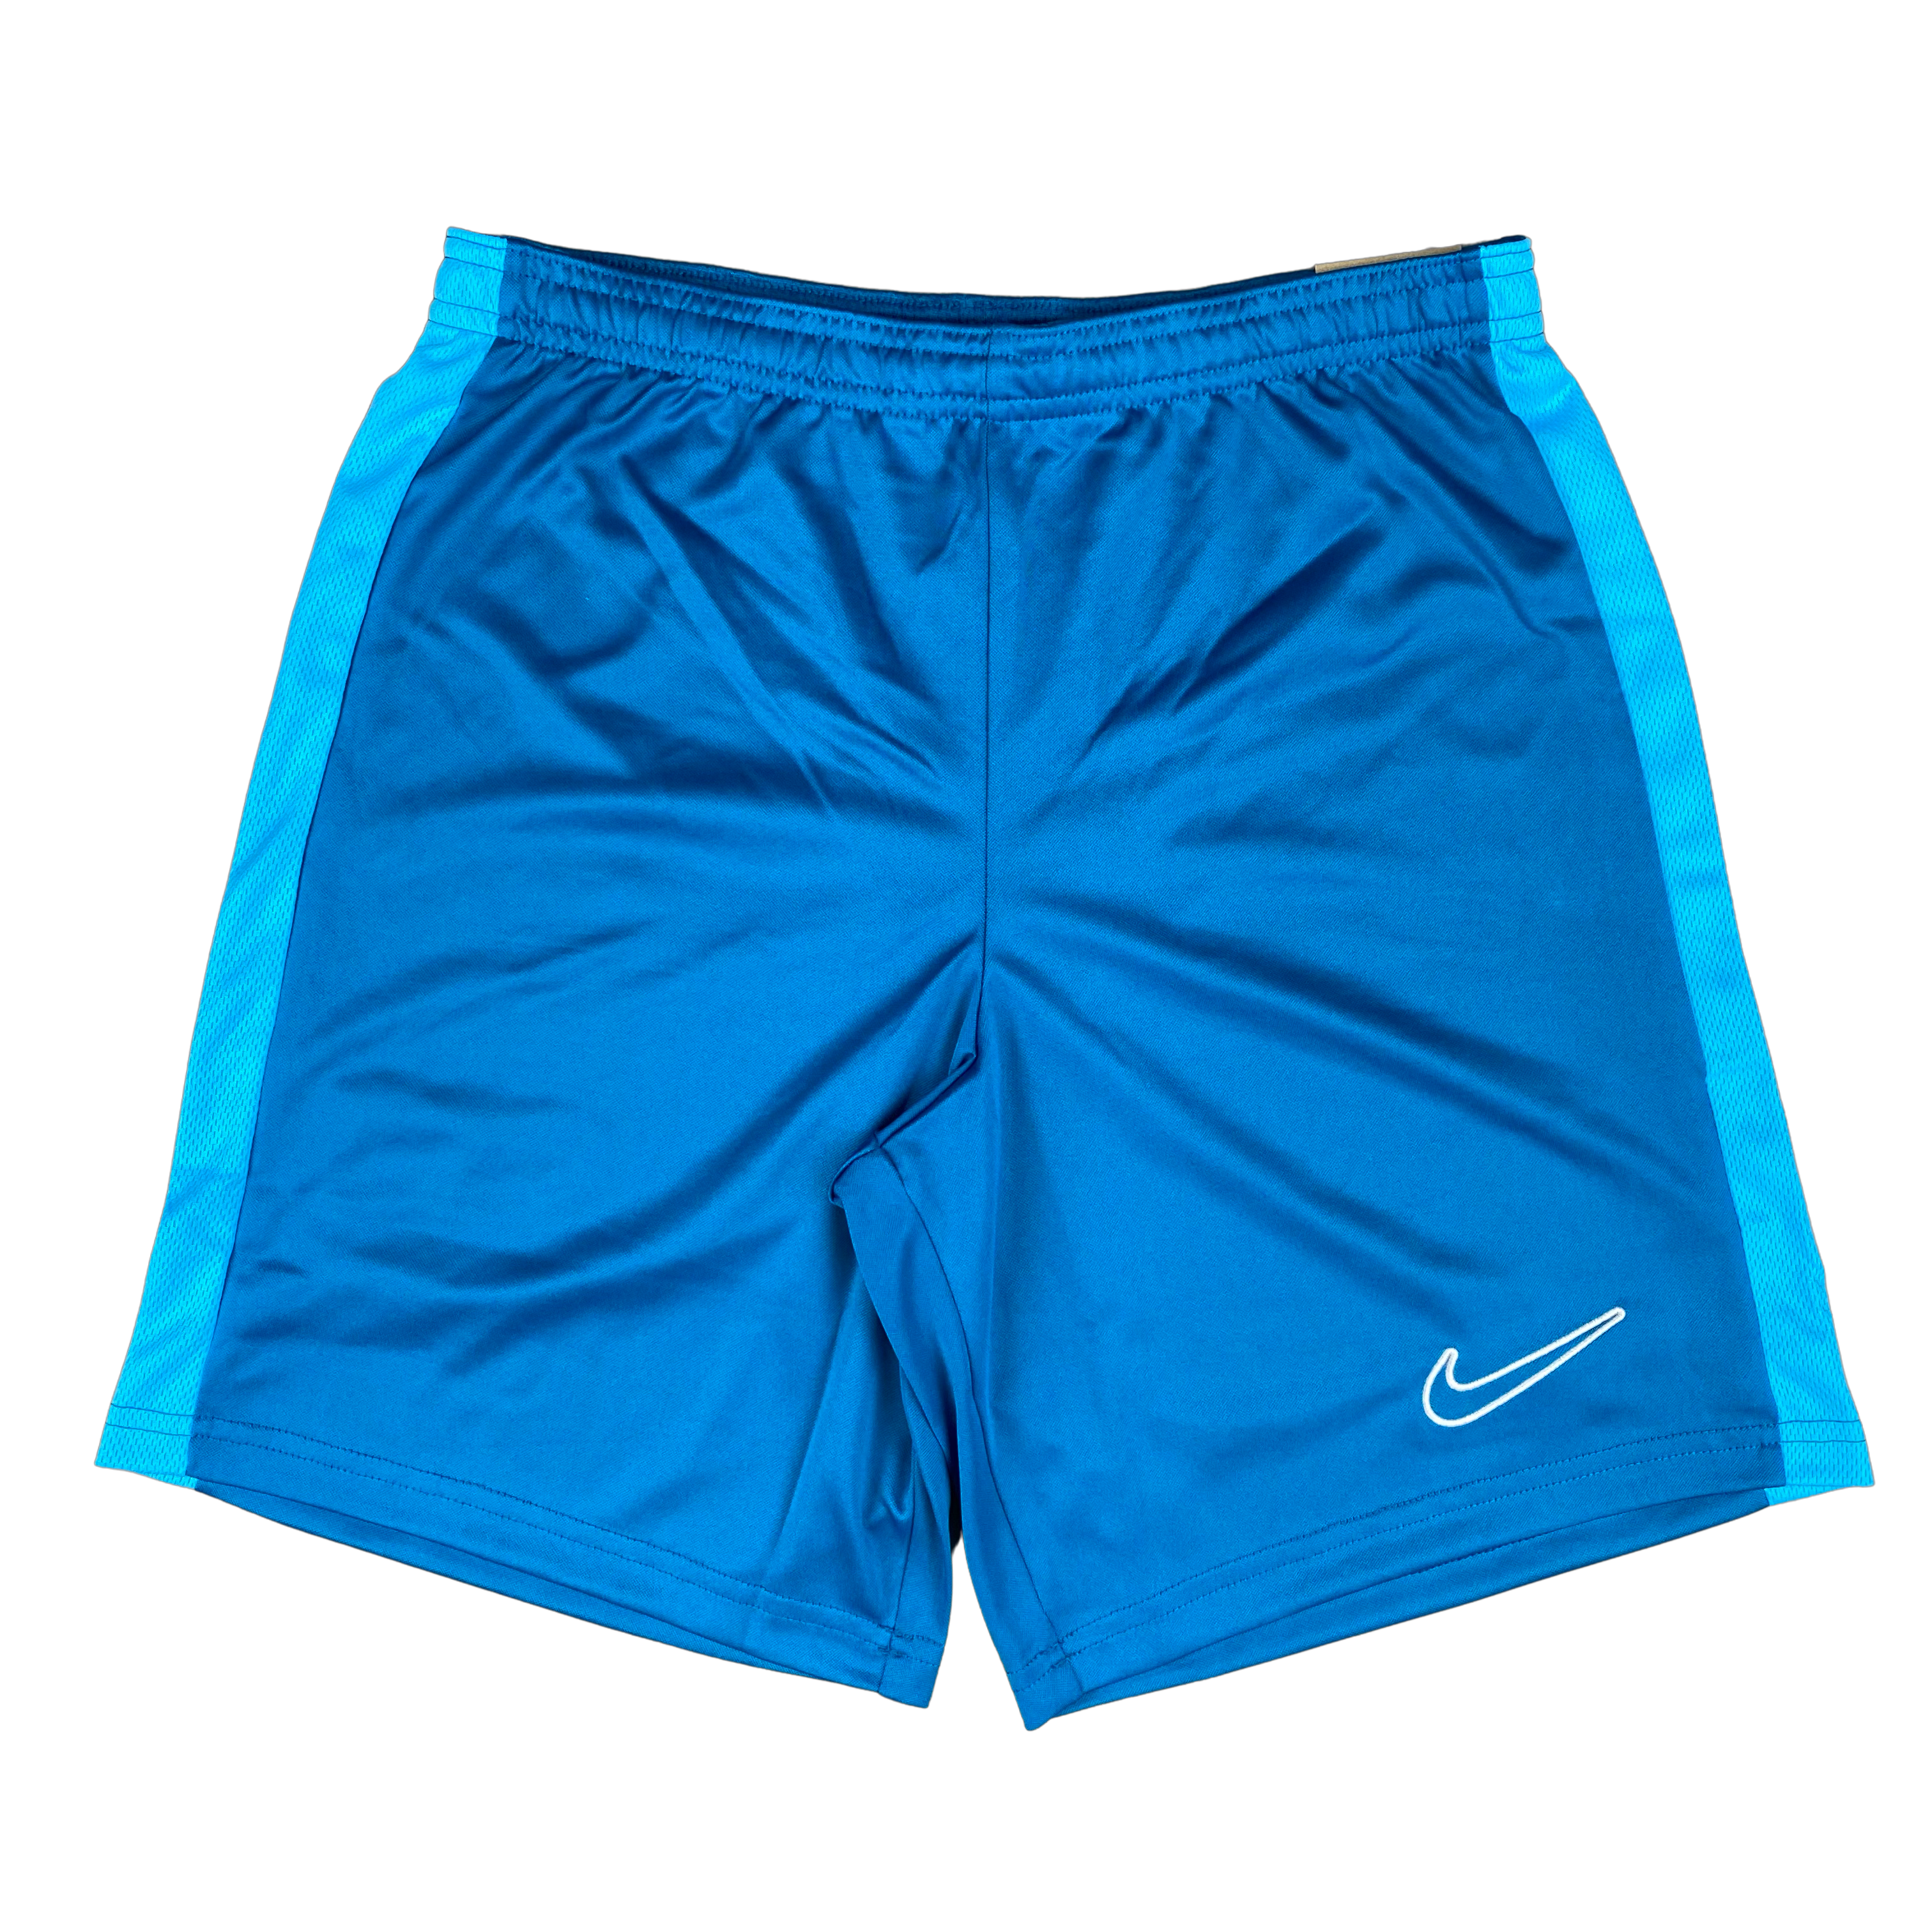 NIKE ACADEMY DRILL SHORTS - MINERAL / TEAL